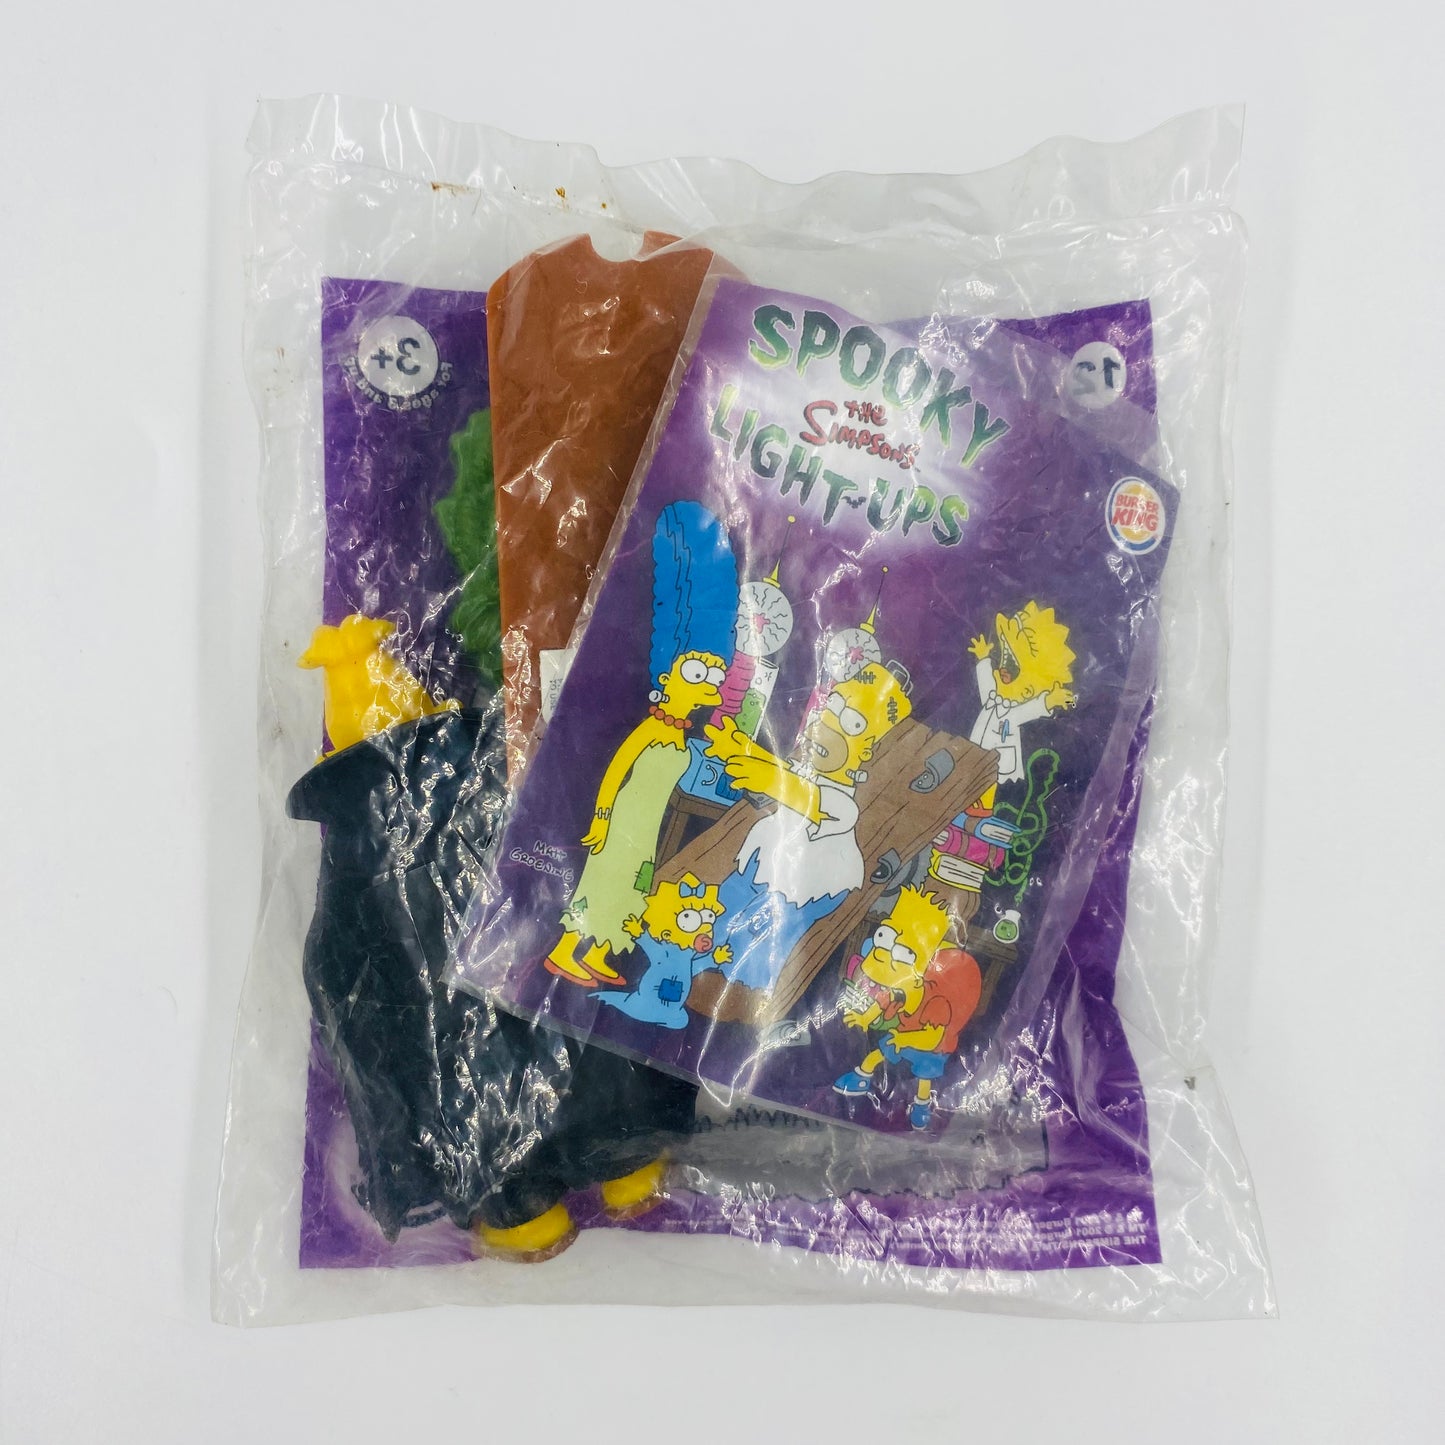 The Simpsons Spooky Light-Ups Grampa Simpson Burger King Kids' Meals toy (2001) bagged